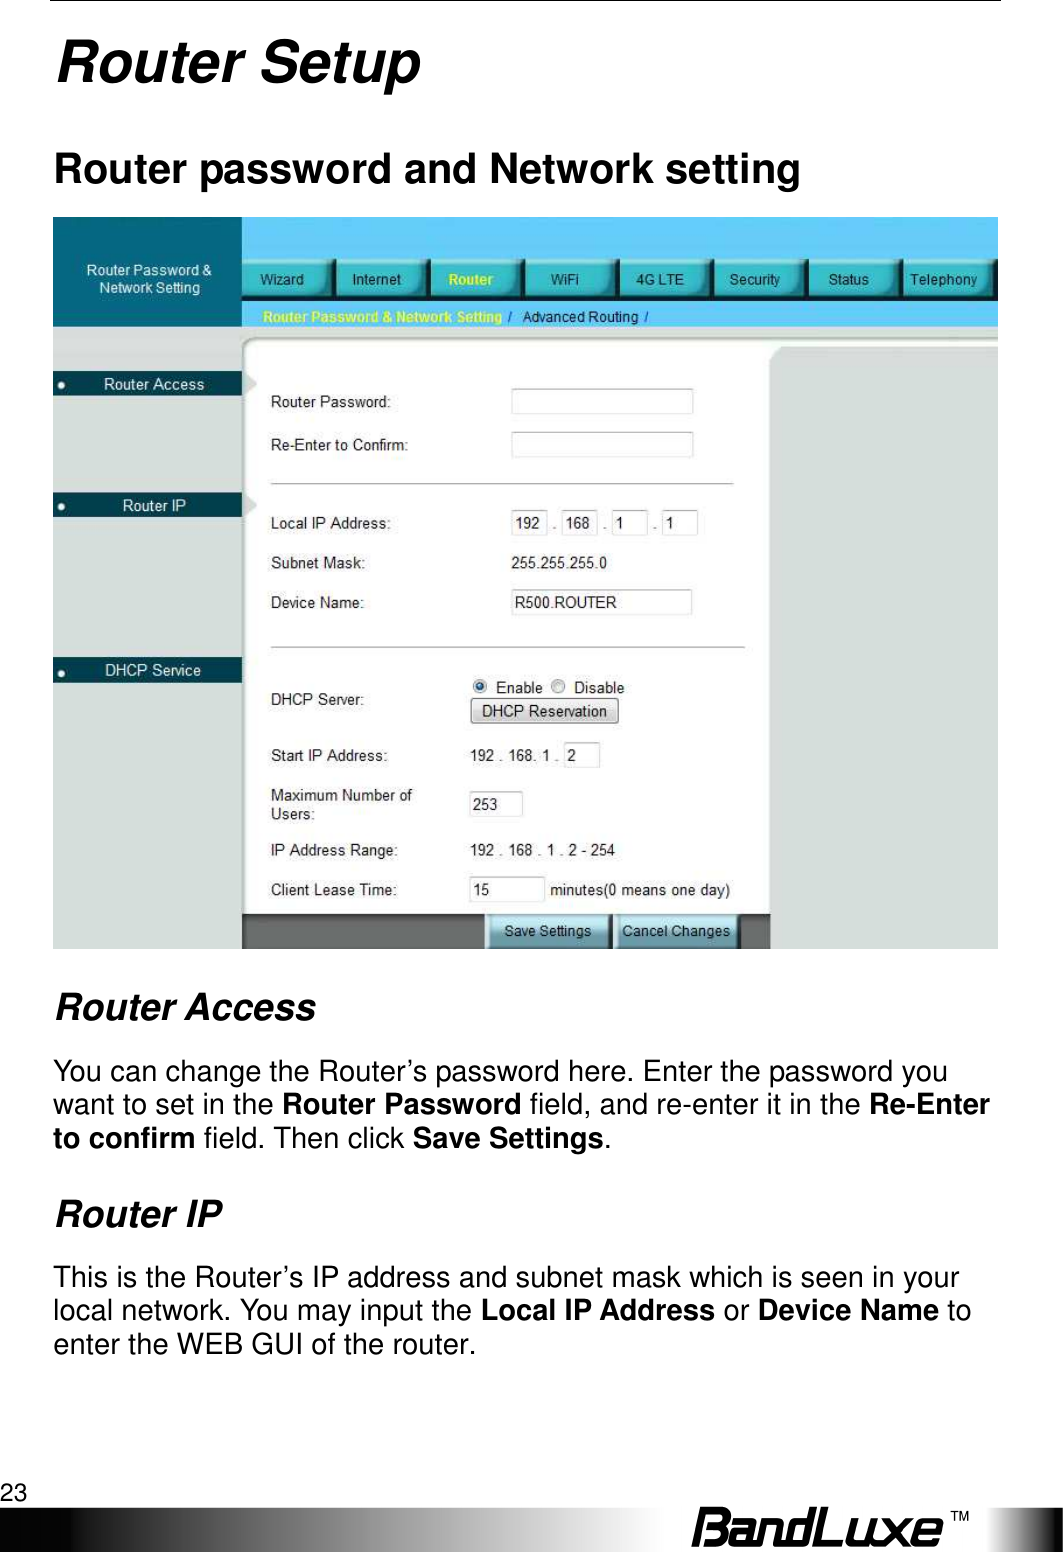   Router Setup 23 Router Setup Router password and Network setting  Router Access You can change the Router’s password here. Enter the password you want to set in the Router Password field, and re-enter it in the Re-Enter to confirm field. Then click Save Settings. Router IP This is the Router’s IP address and subnet mask which is seen in your local network. You may input the Local IP Address or Device Name to enter the WEB GUI of the router. 